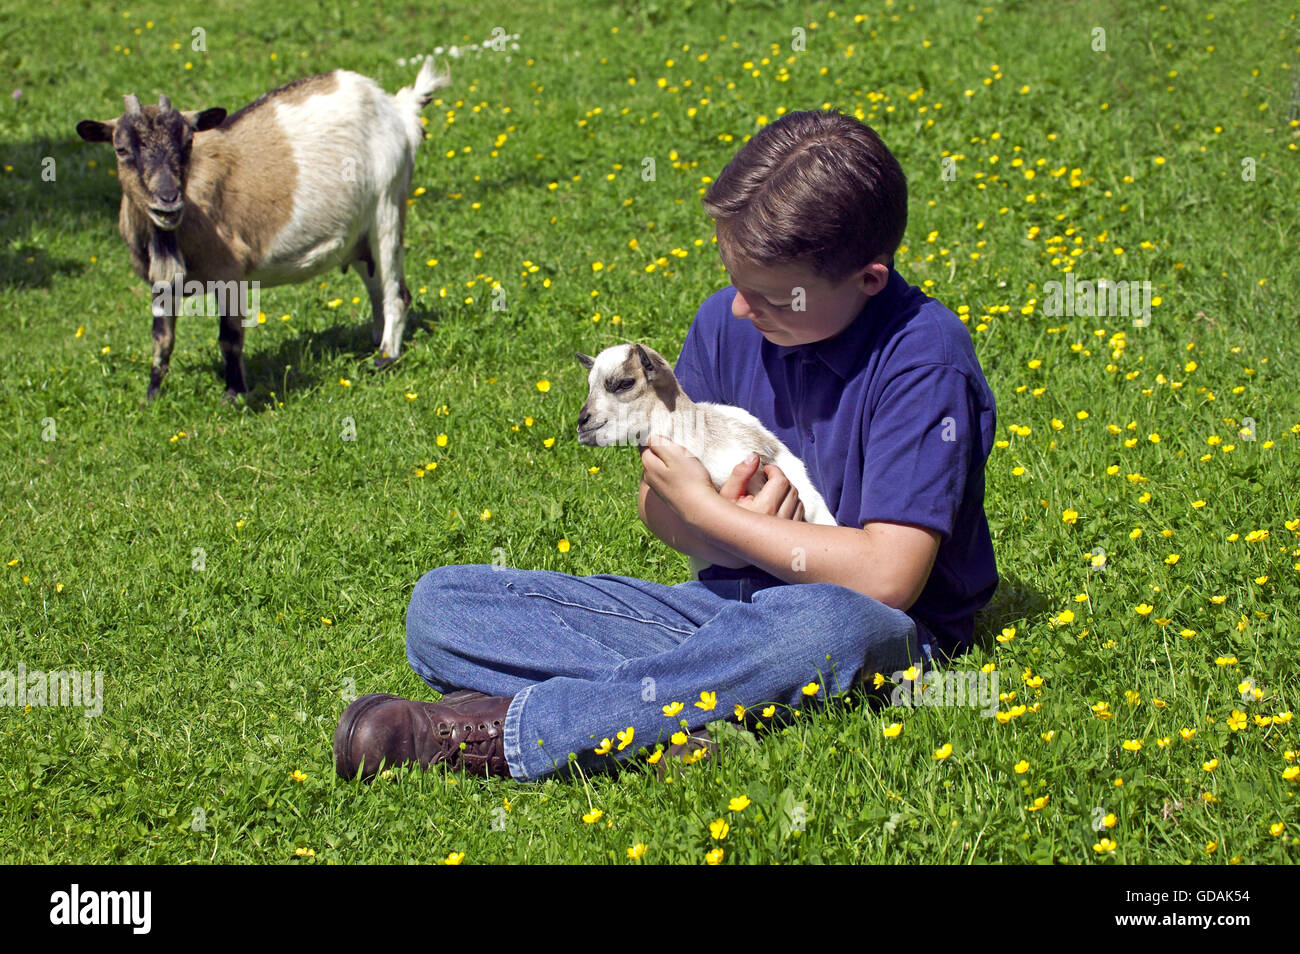 Boy holding a Young Pygmy Goat Stock Photo